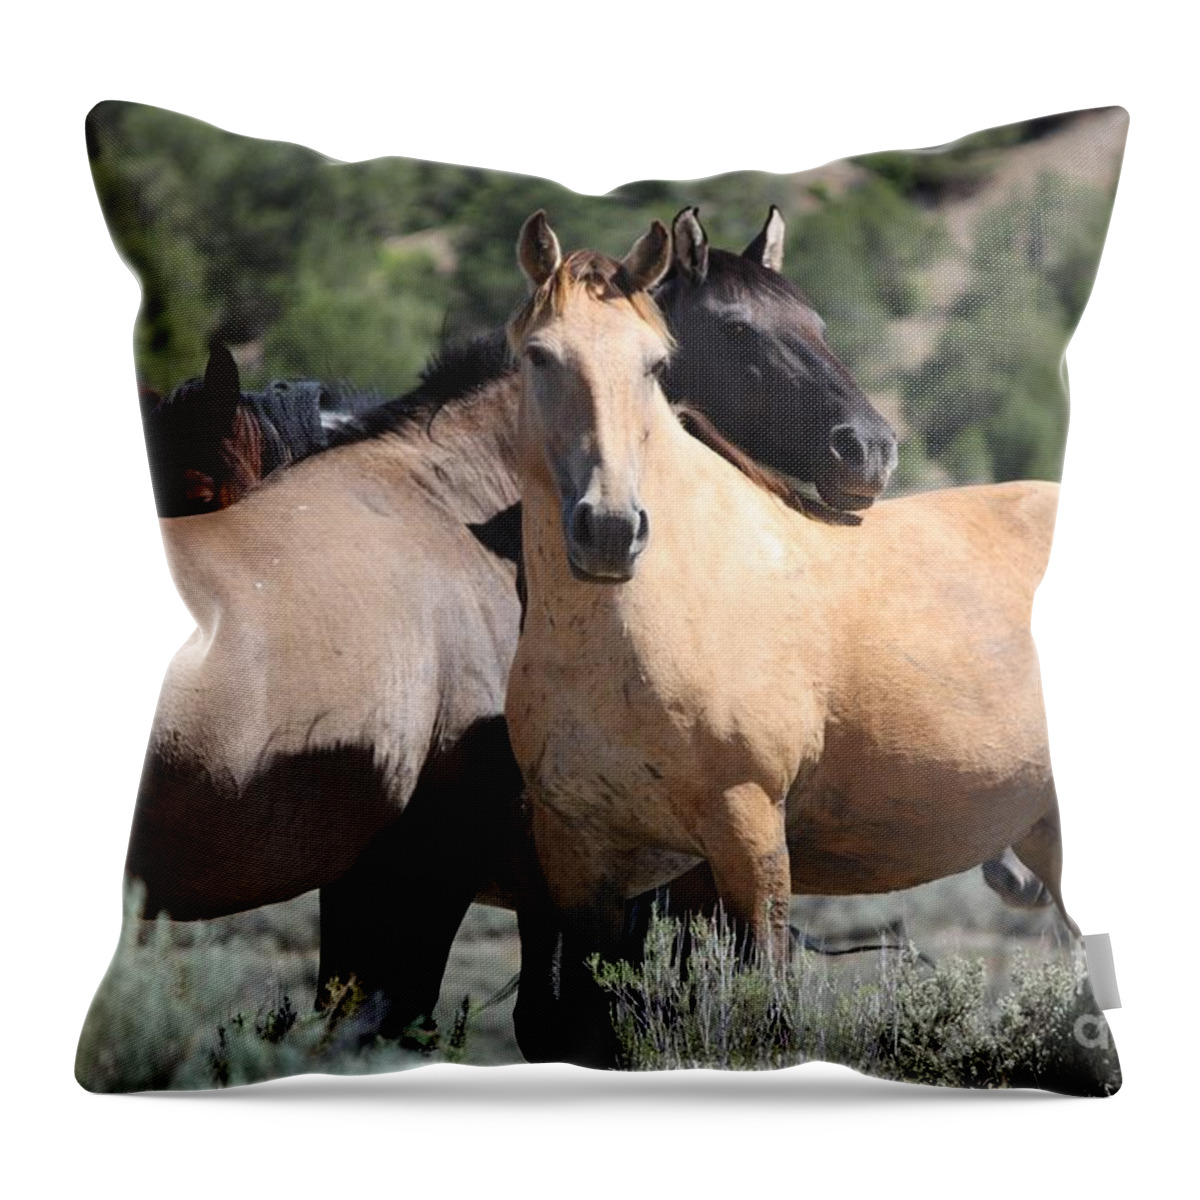 Horses Throw Pillow featuring the photograph Band of Friends - Monero Mustangs Sanctuary by Veronica Batterson